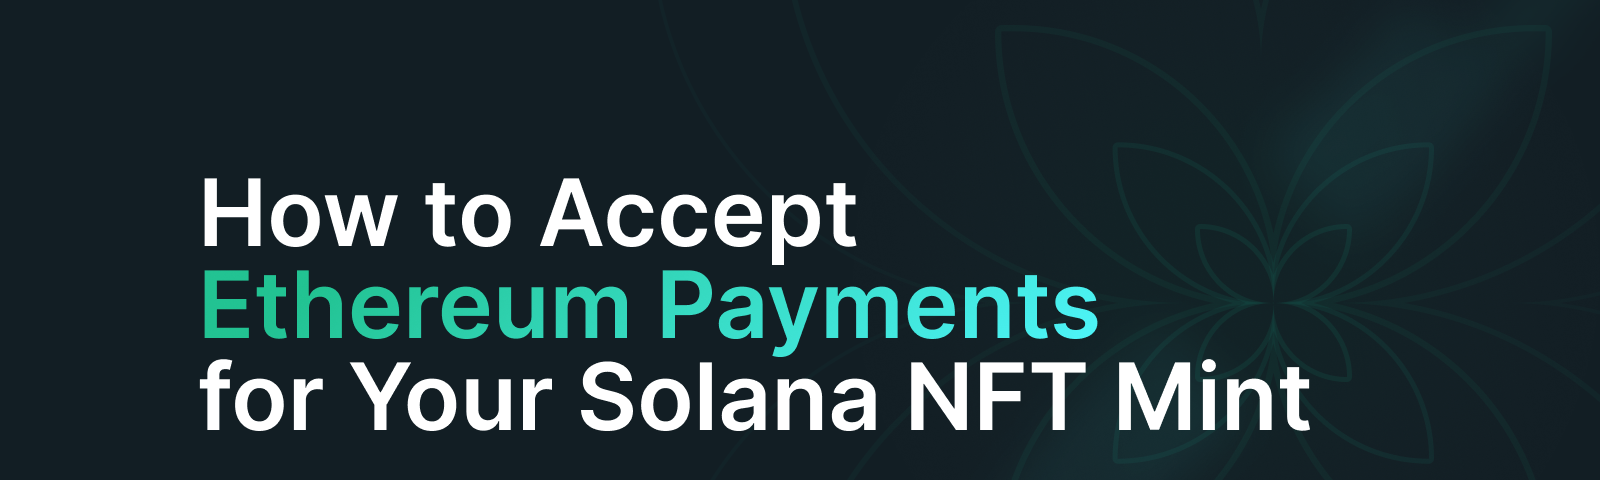 How To Accept Ethereum Payments for Your Solana NFT Mint